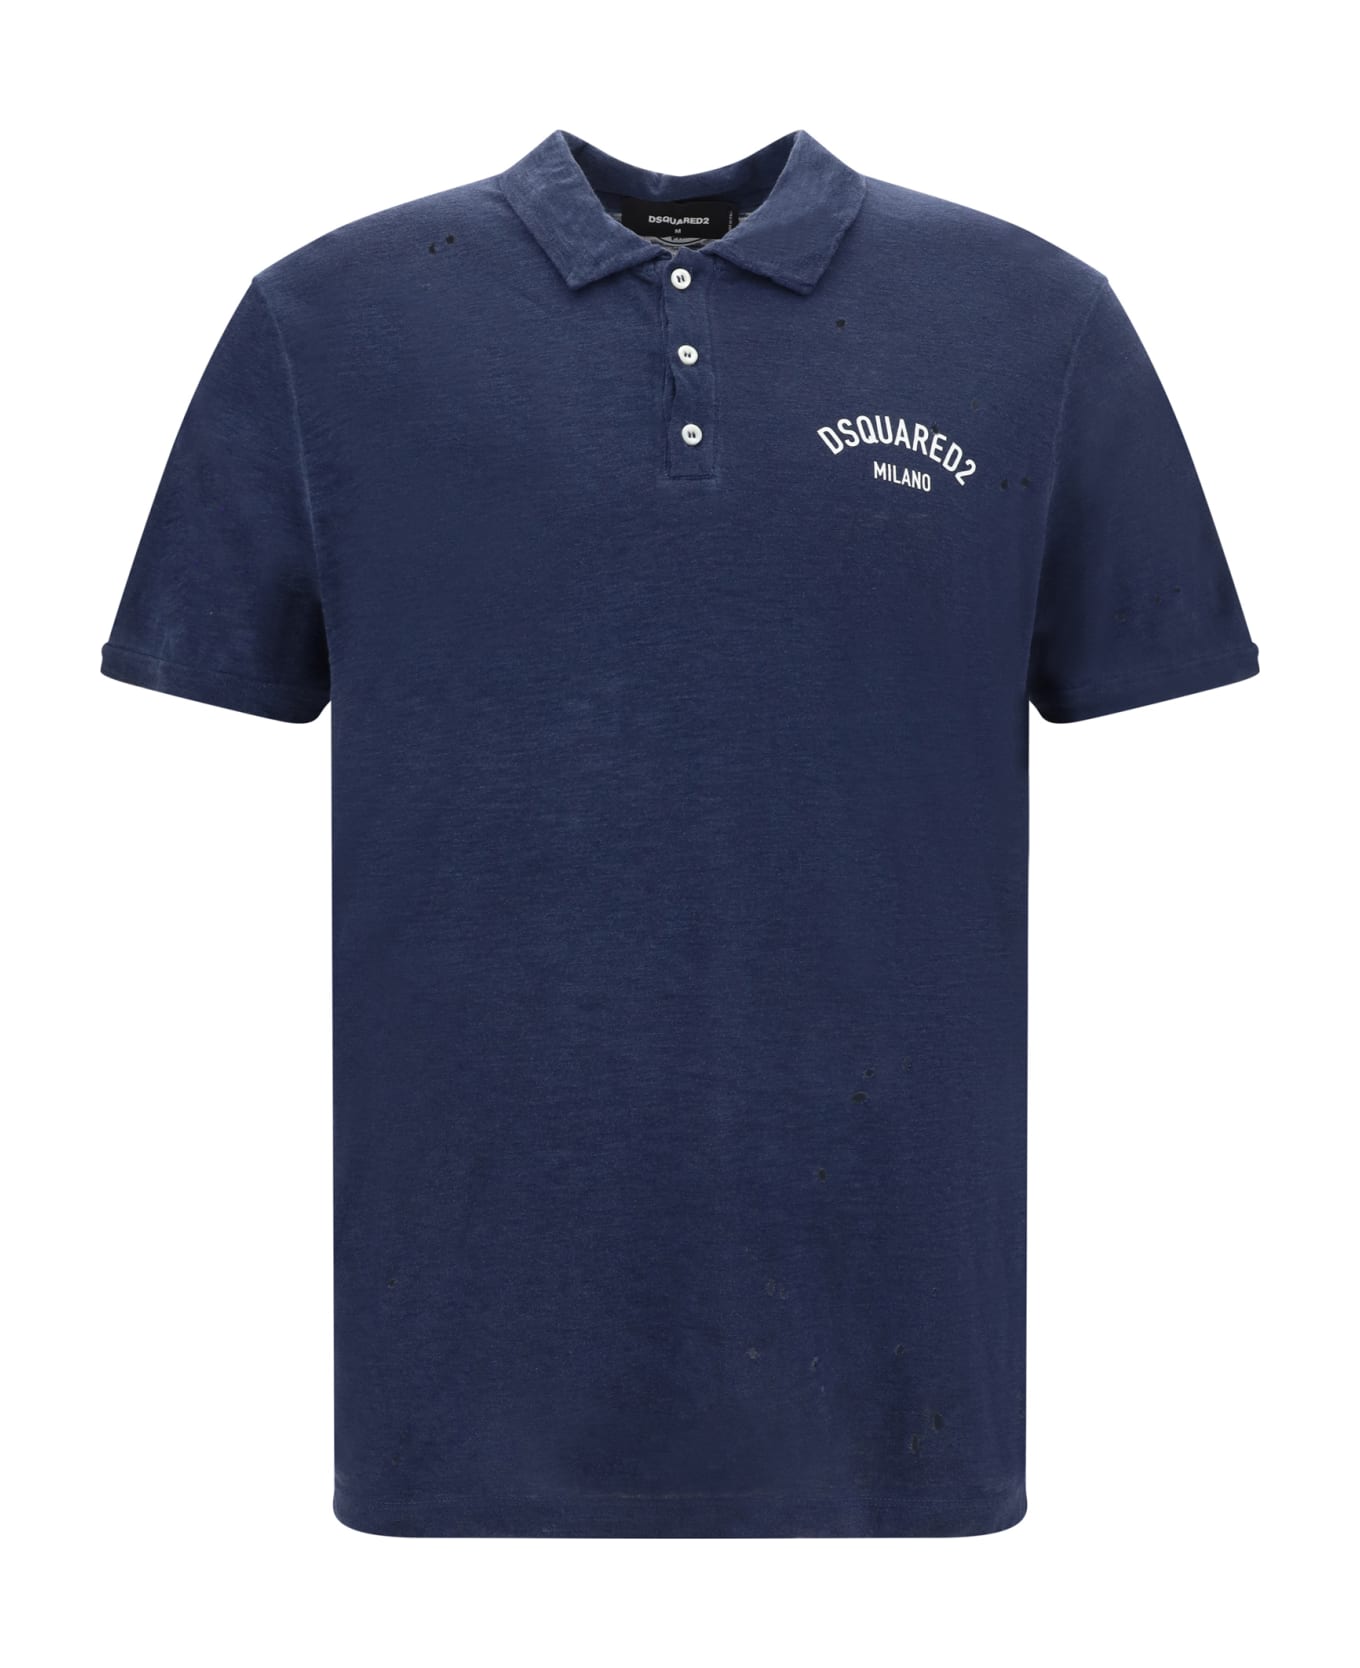 Dsquared2 Polo Shirt - Navy Blue ポロシャツ